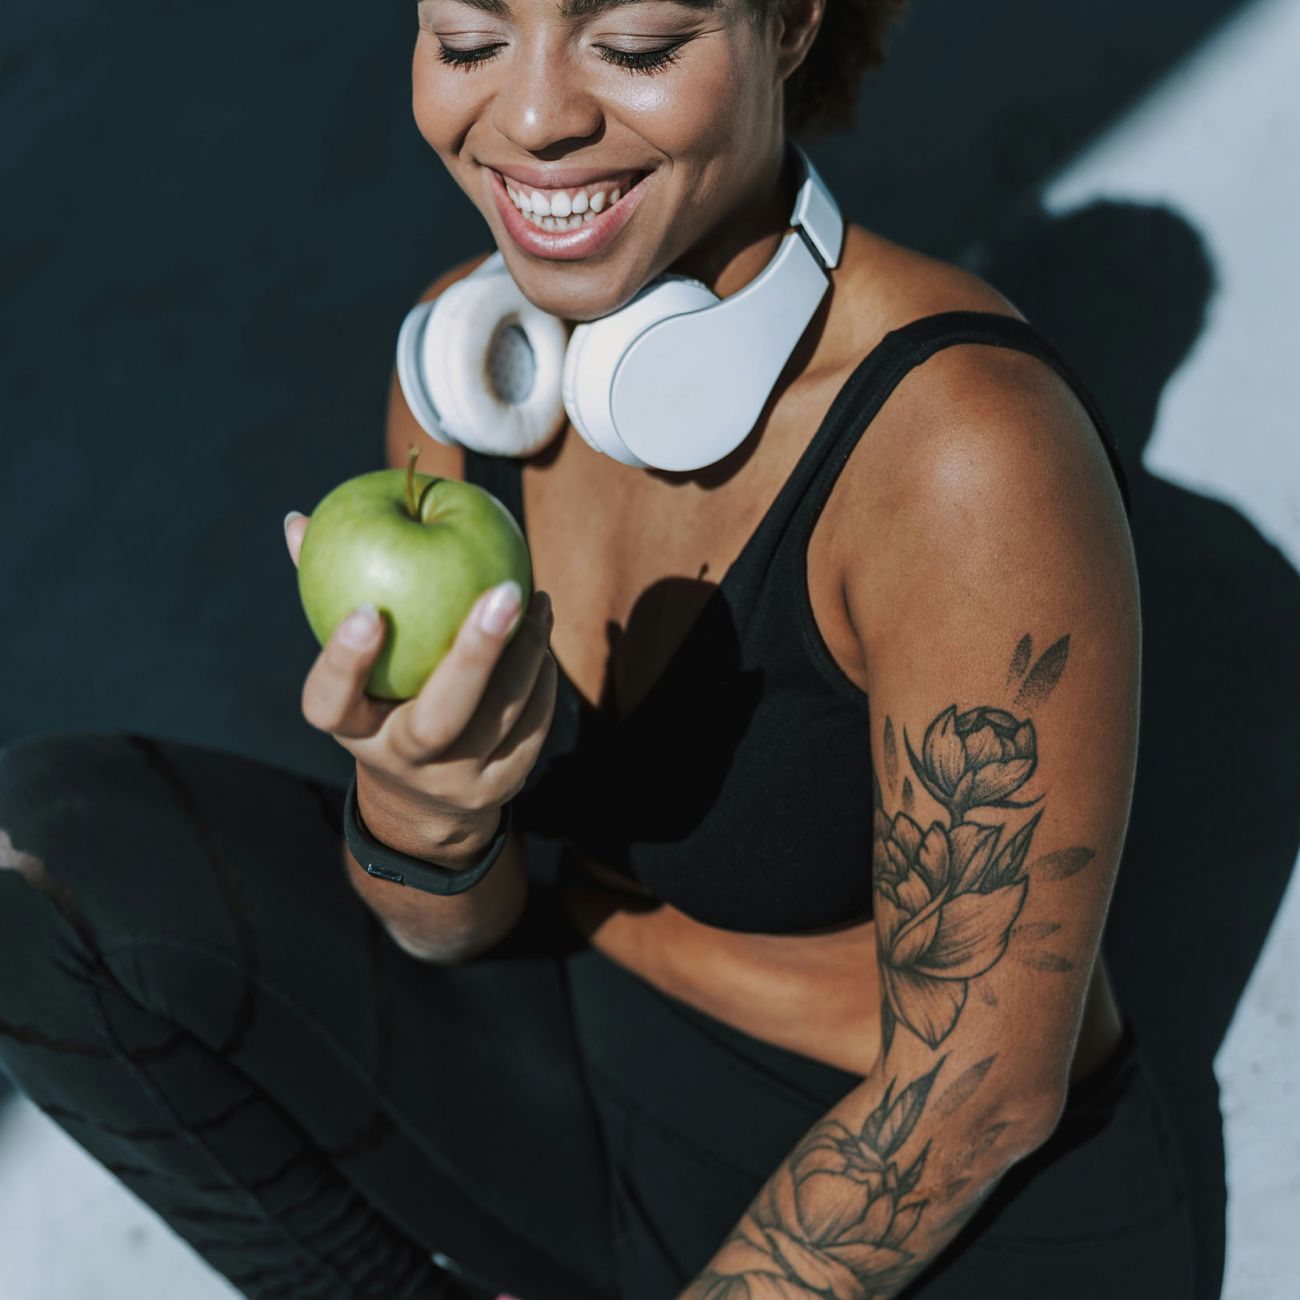 Woman in workout gear and headphones eating a green apple 